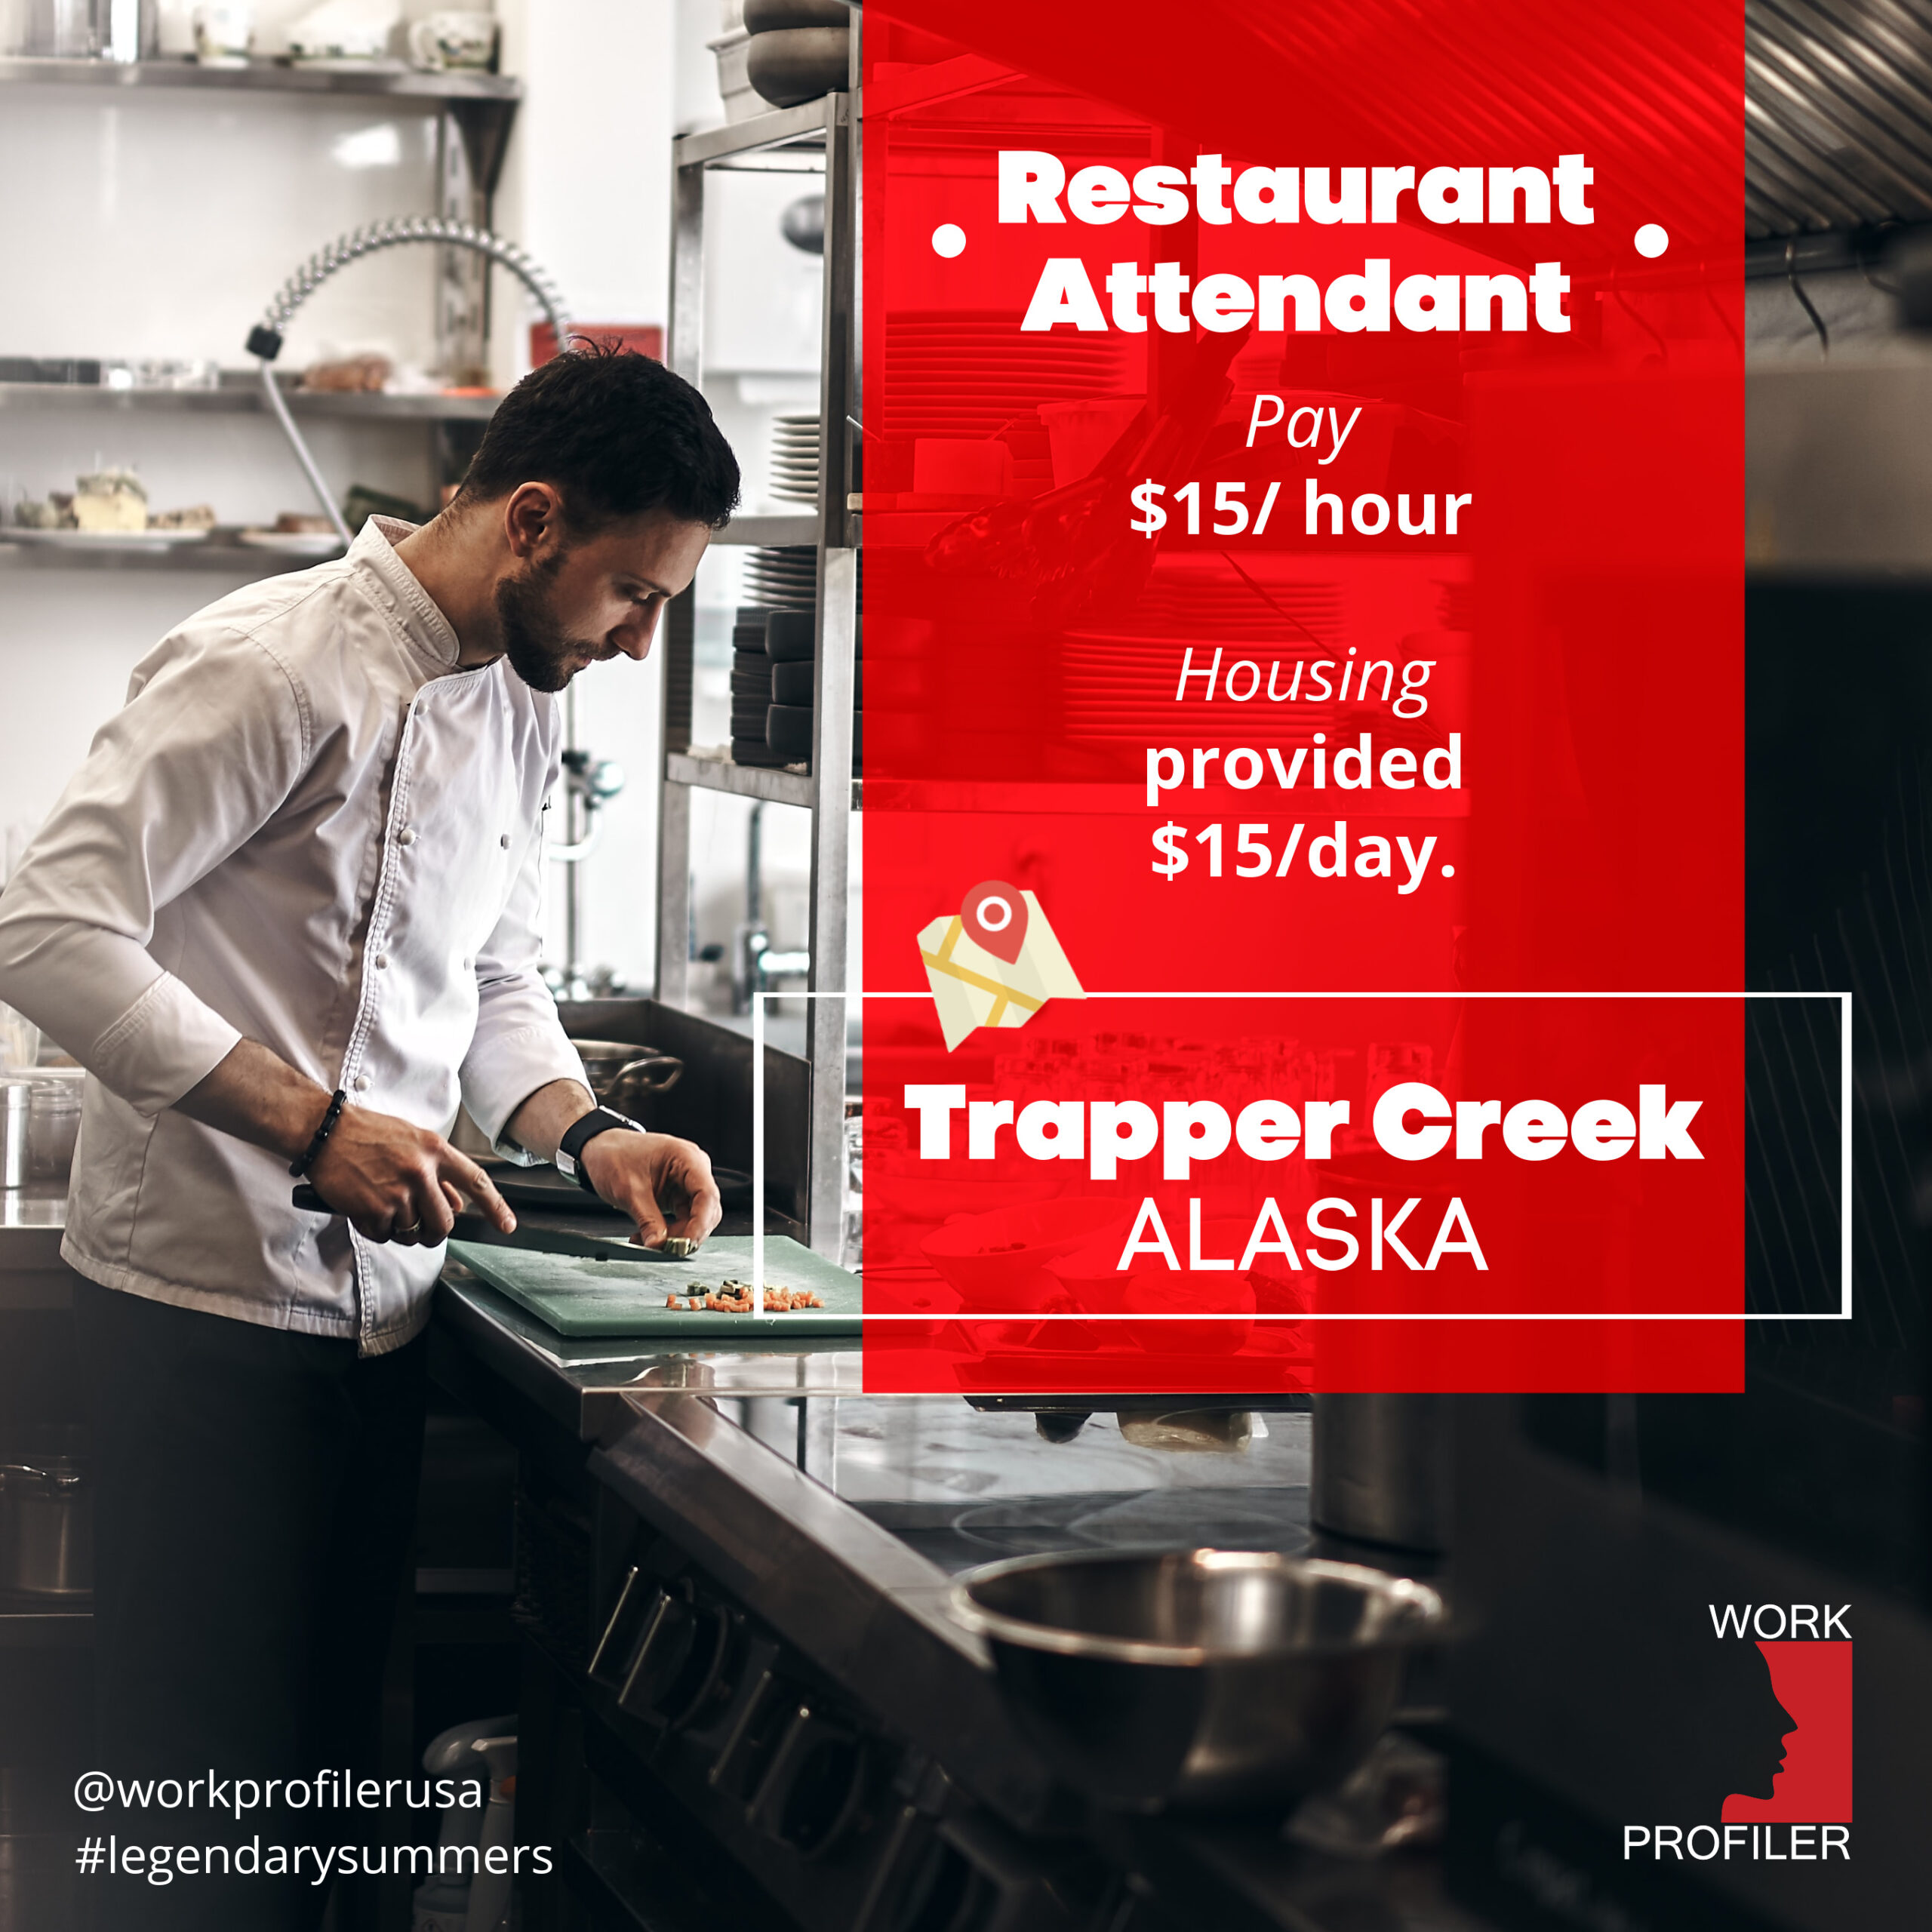 A job advertisement for a restaurant attendant position at Mt. McKinley Princess Wilderness Lodge in Trapper Creek, Alaska. The add offers $15 per hour pay and $15 per day for housing